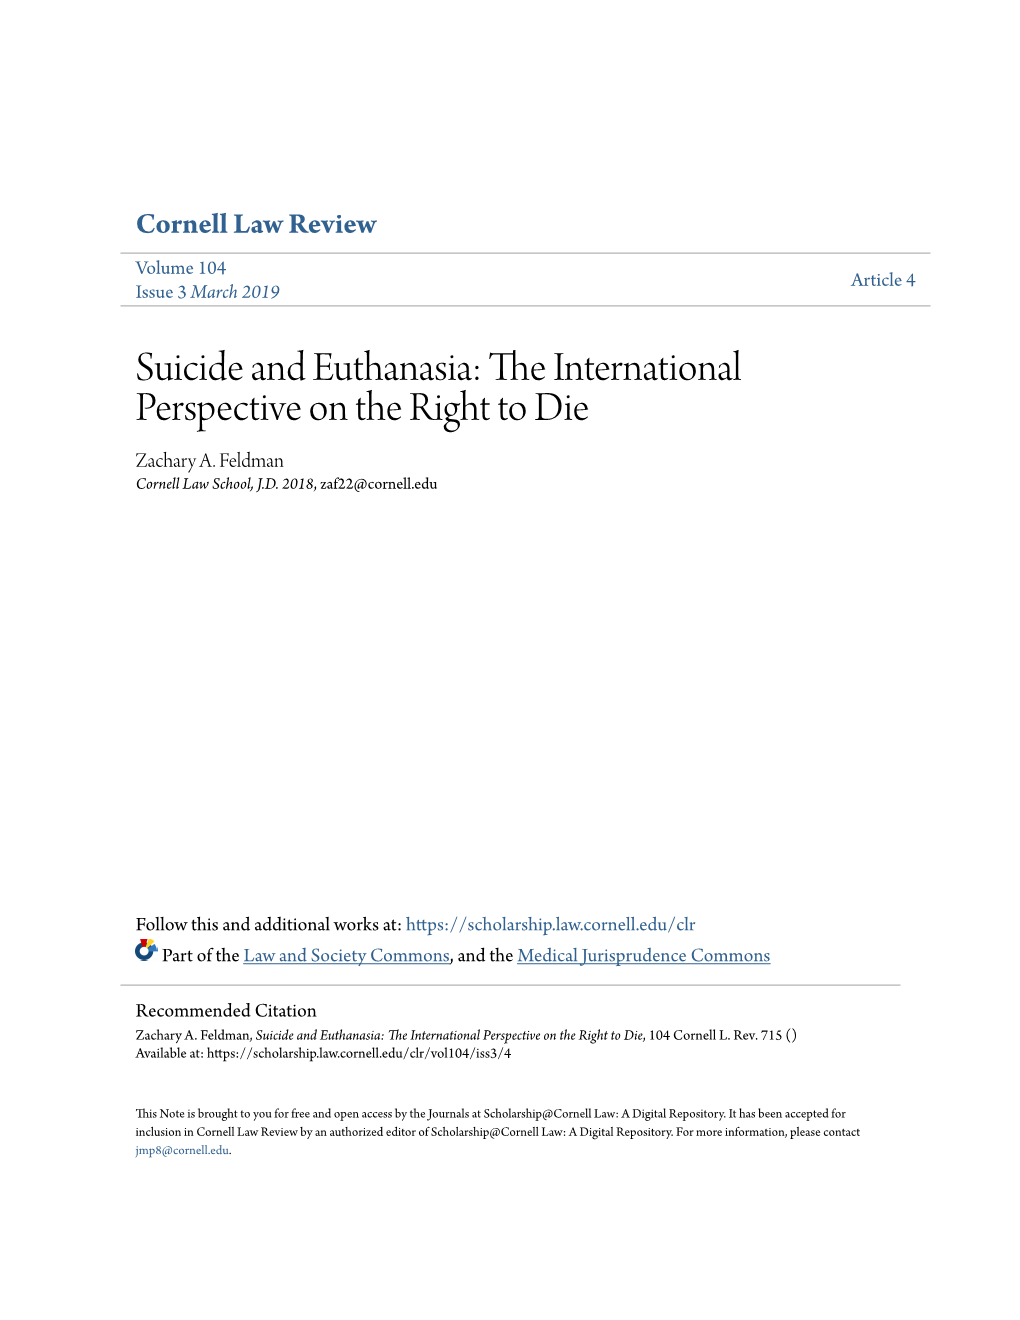 Suicide and Euthanasia: the Ni Ternational Perspective on the Right to Die Zachary A